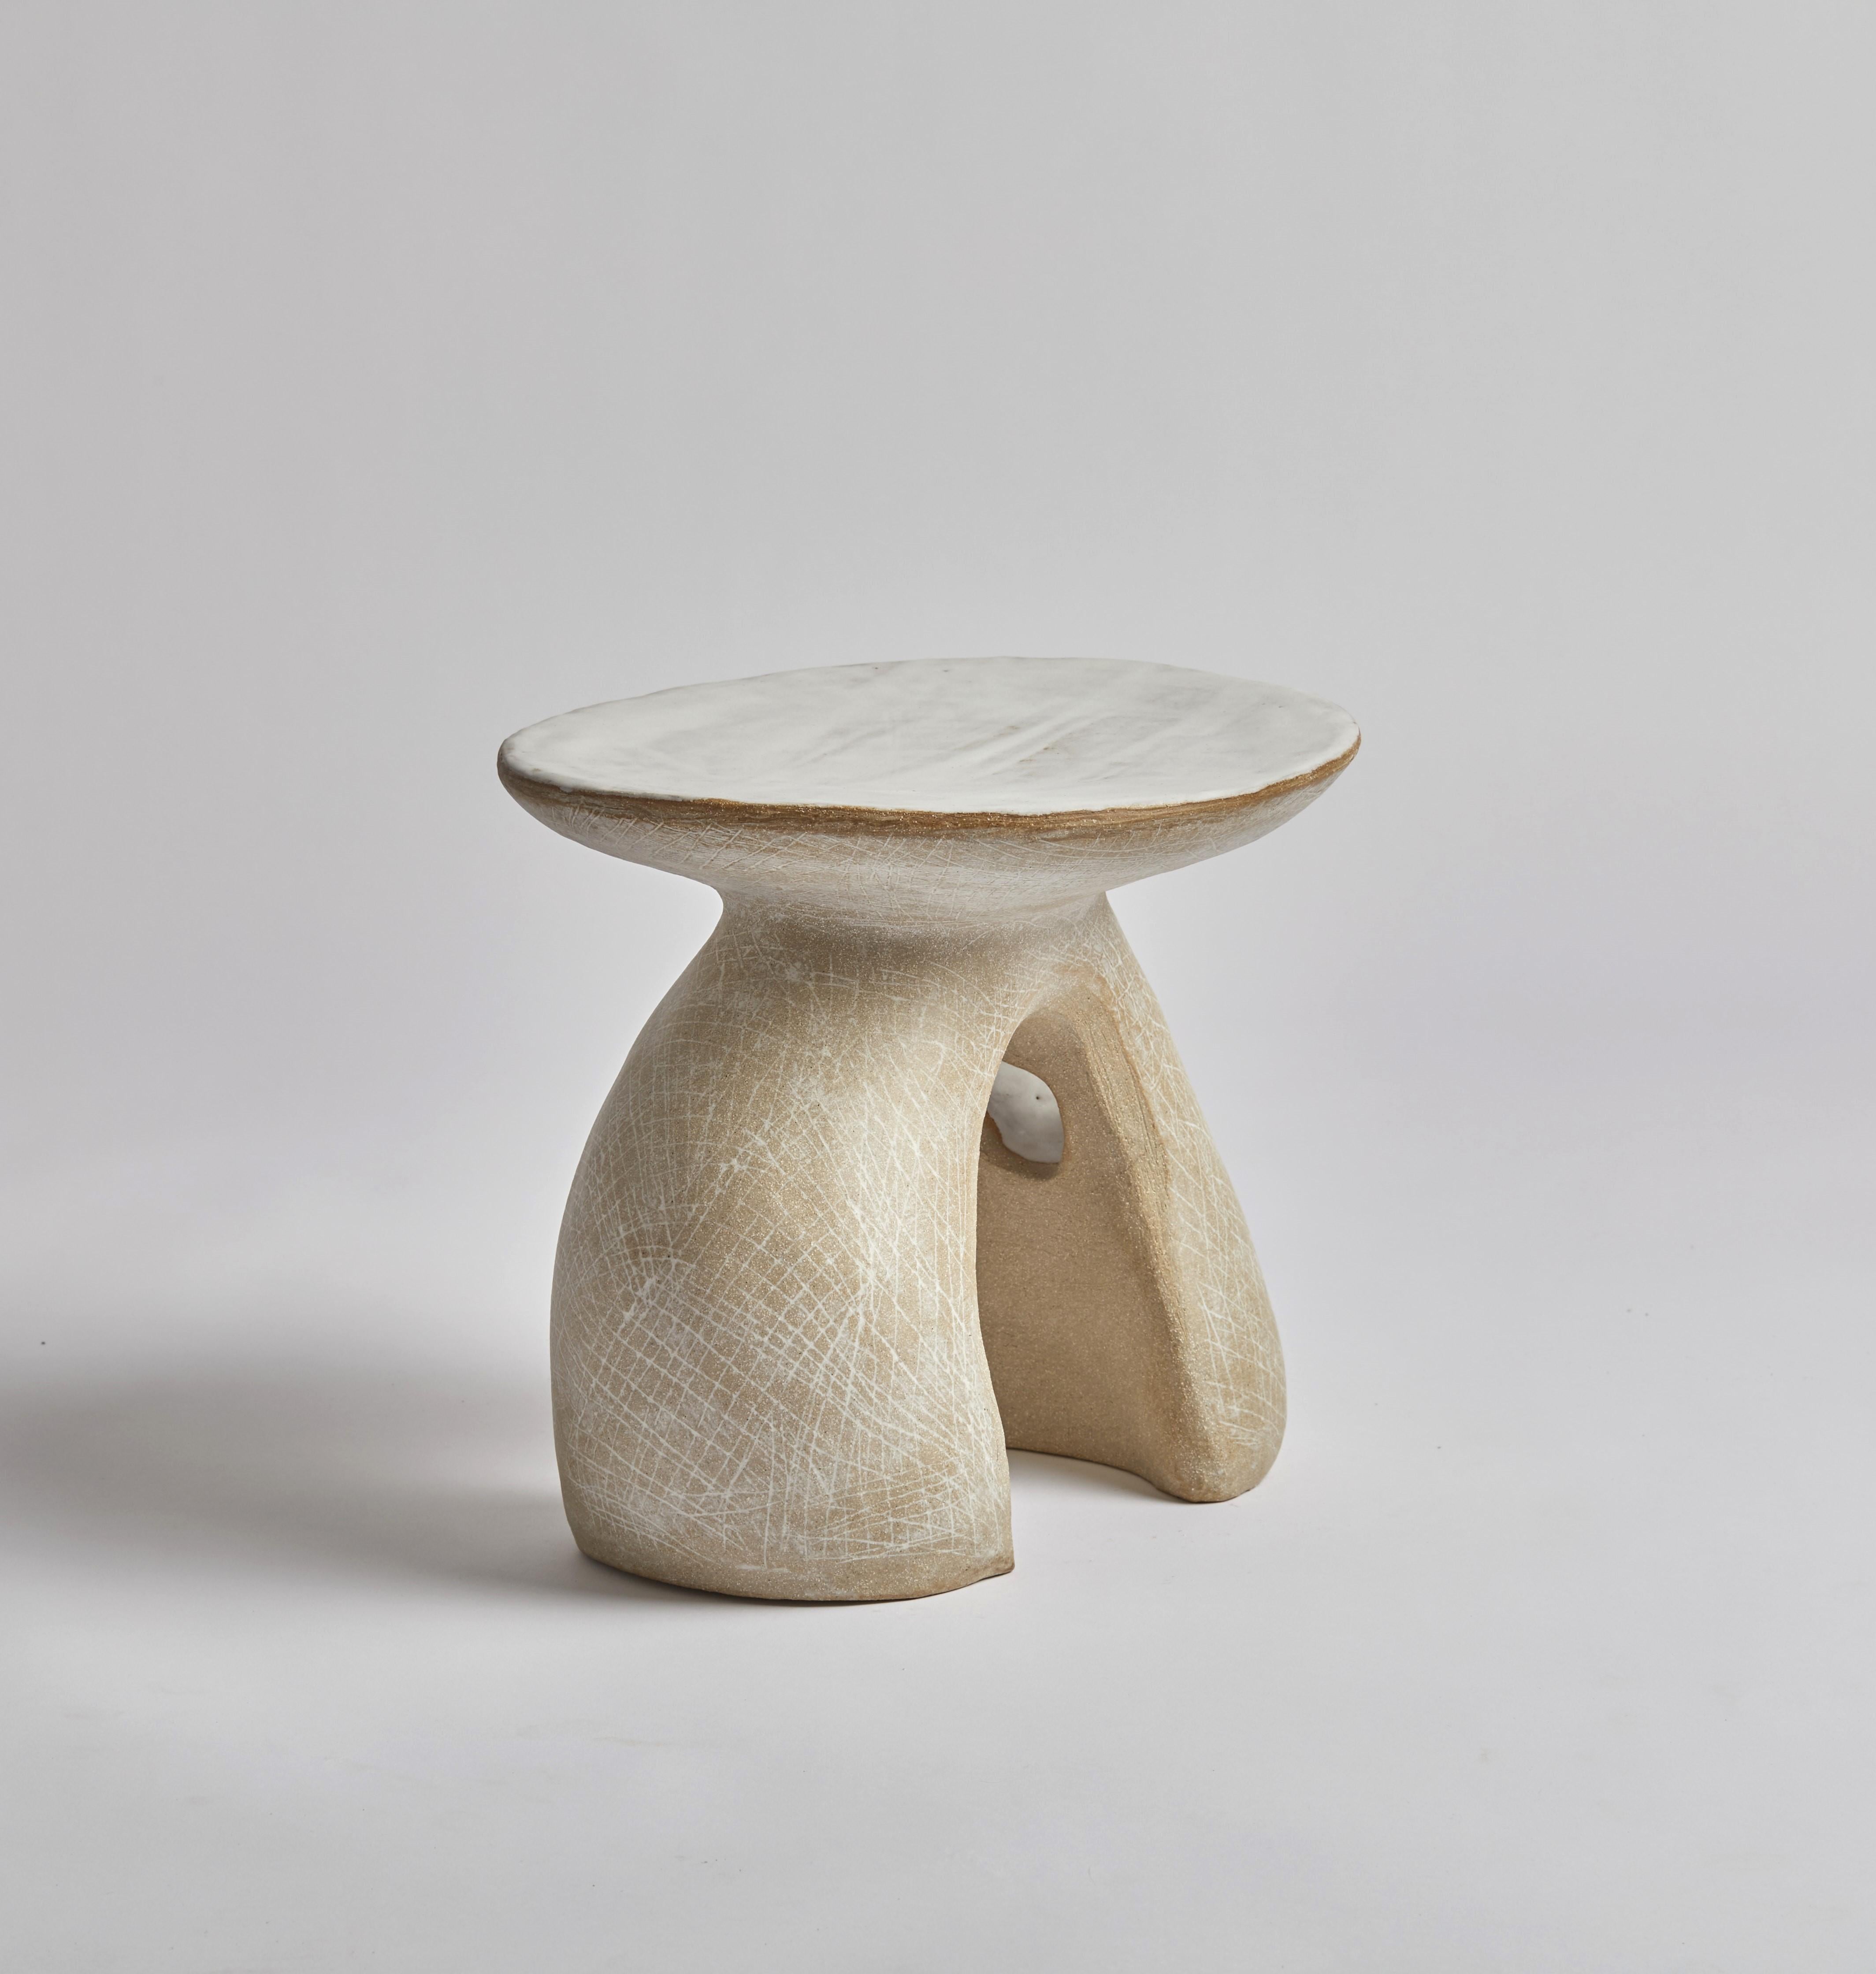 This side table has been hand built by it's creator, Kerry Hastings.  Inspired by sculptors such as Jean Hans Arp and Barbara Hepworth Kerry has used a blend of two clays, a toasted brown stoneware and white stoneware, to create this unique piece. 